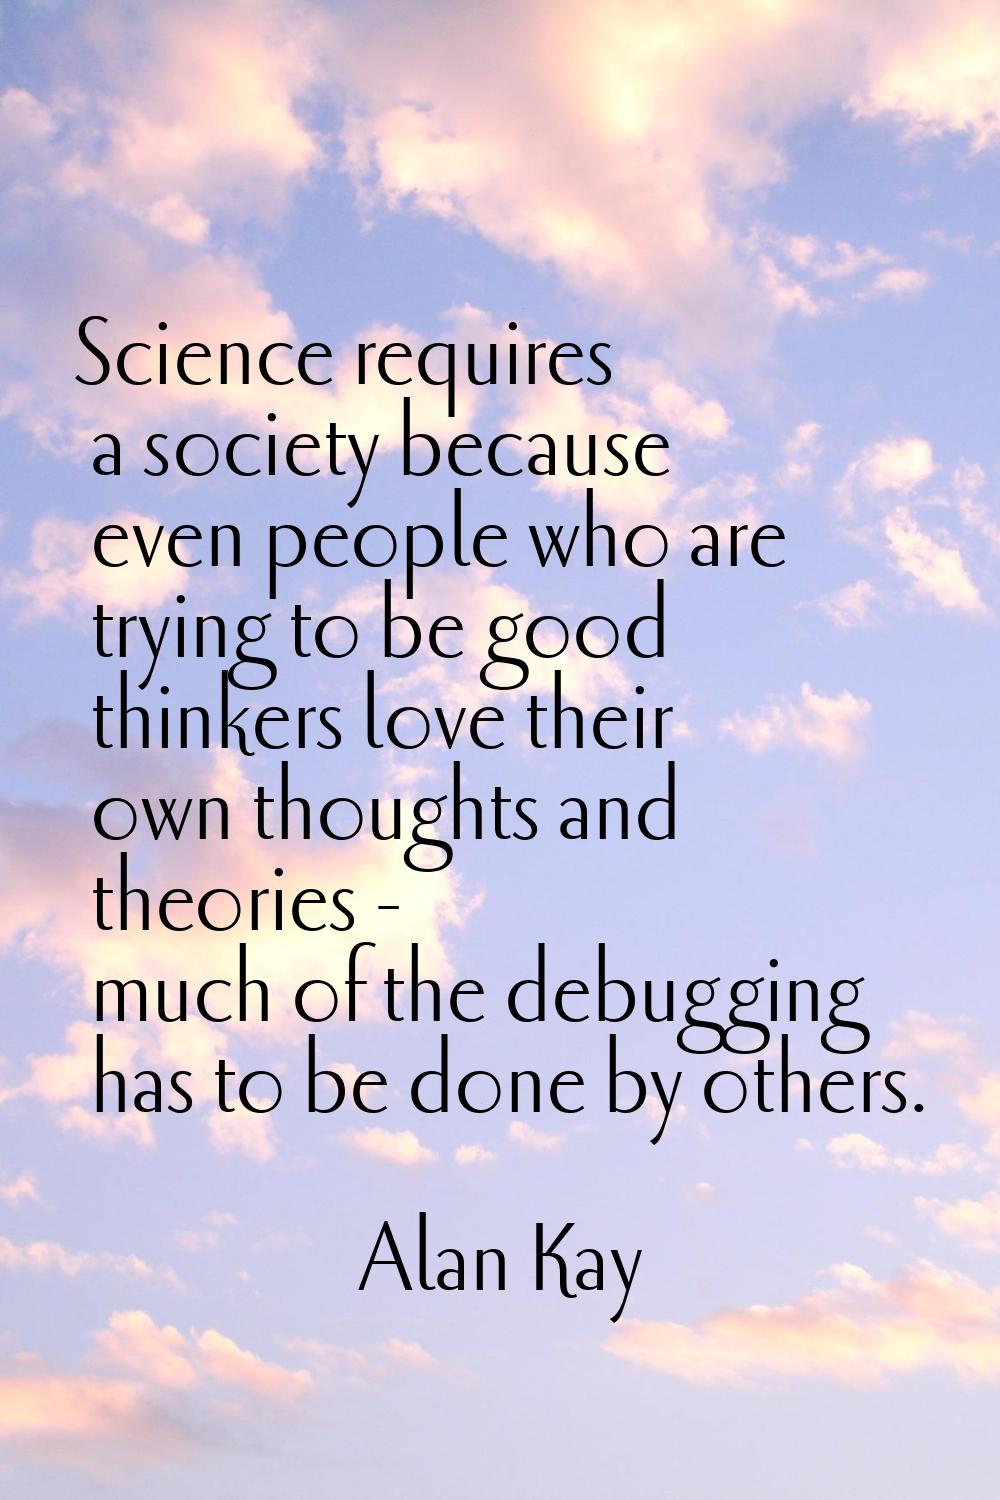 Science requires a society because even people who are trying to be good thinkers love their own th